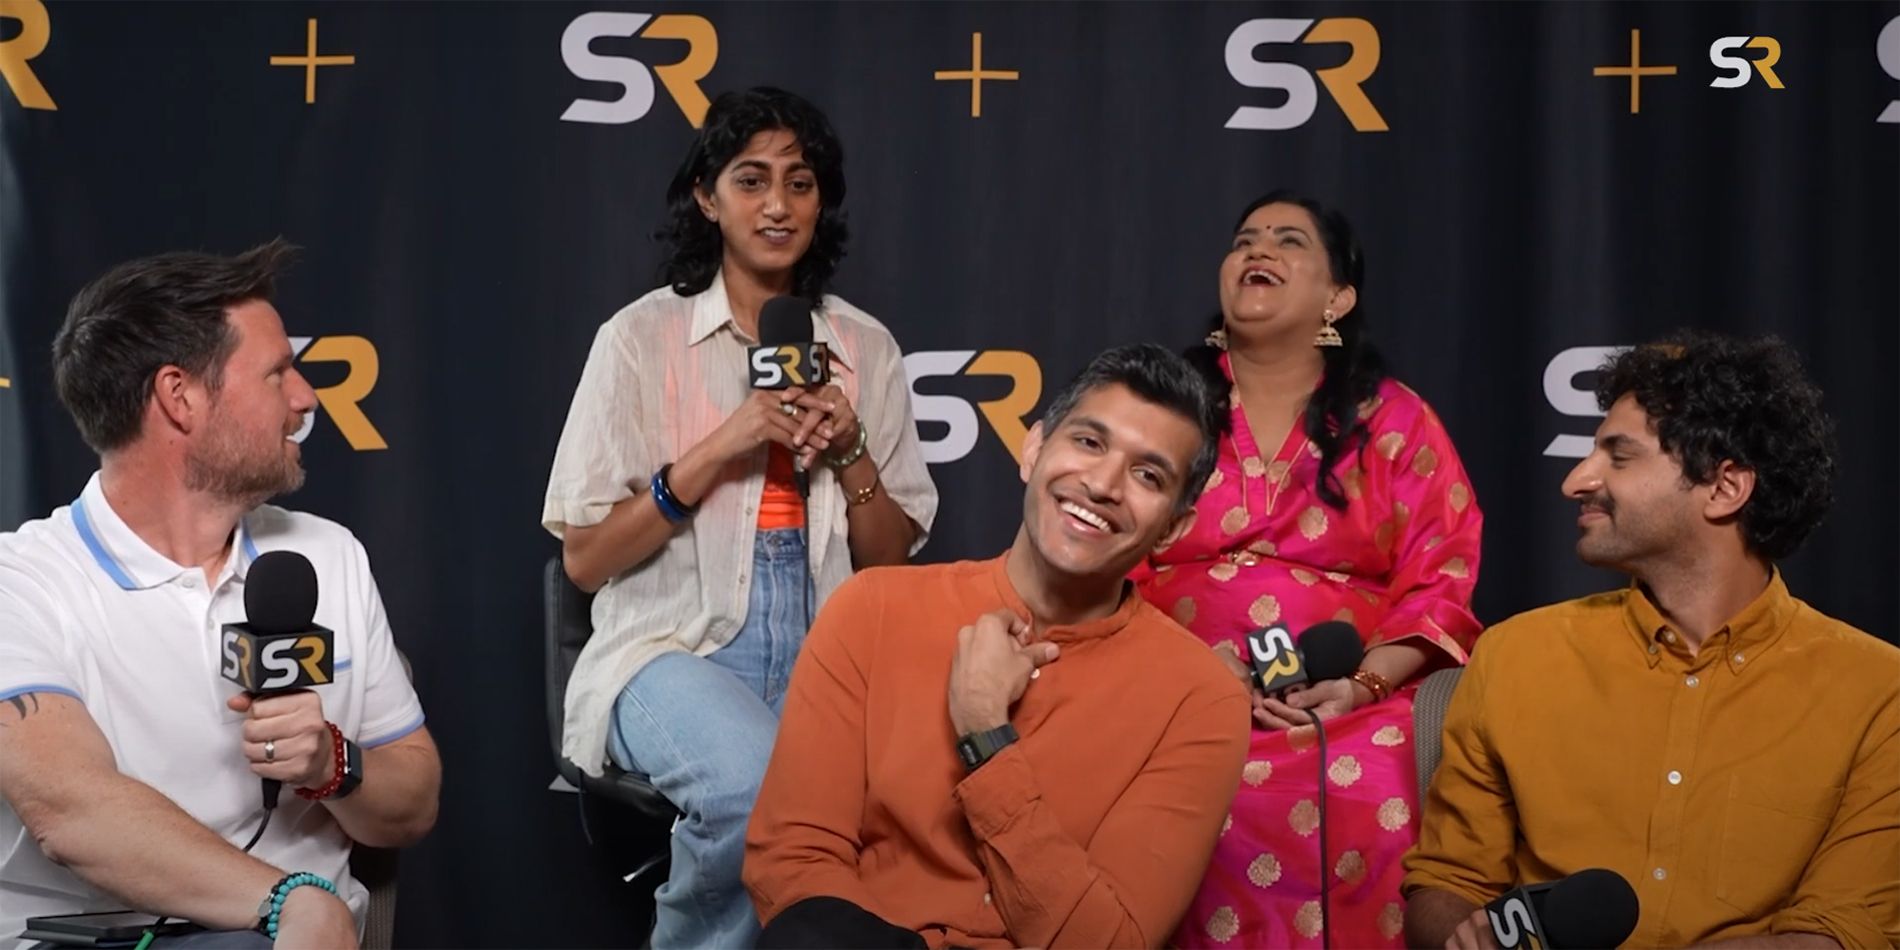 A Nice Indian Boy cast & director at SXSW with Screen Rant